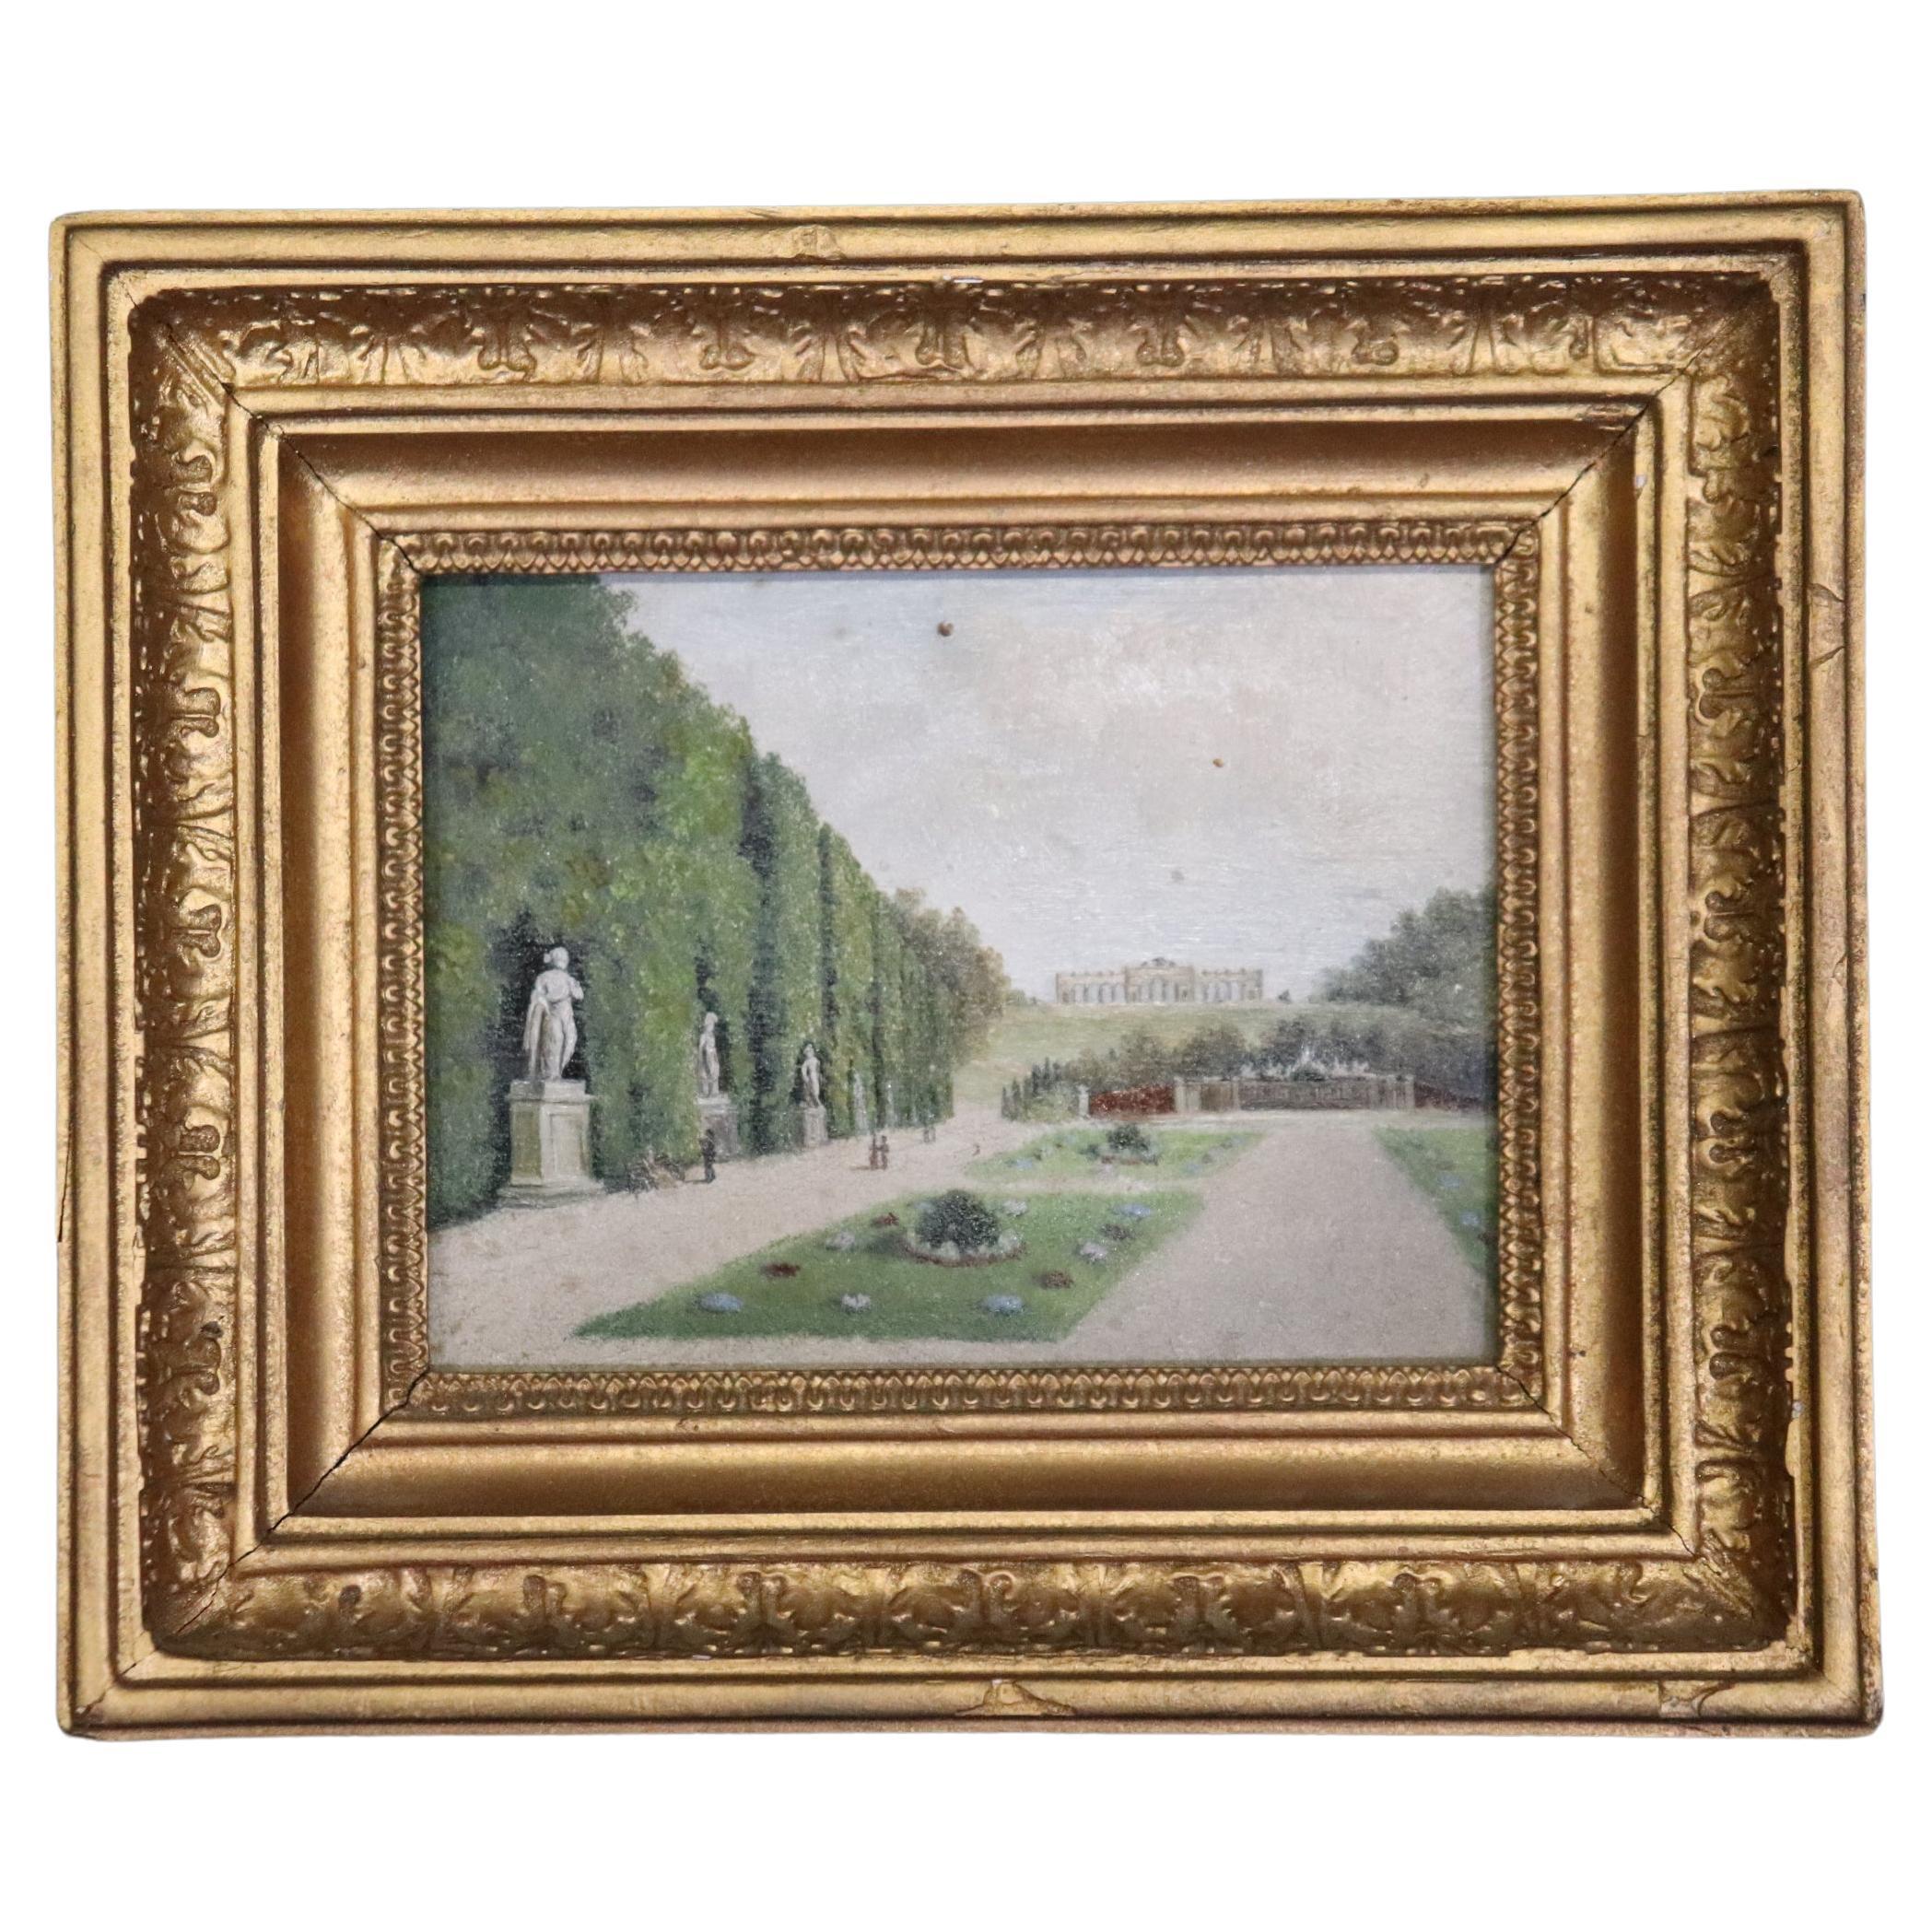 Antique Mini Neoclassical Grand Tour Style Oil Painting On Board of A Landscape